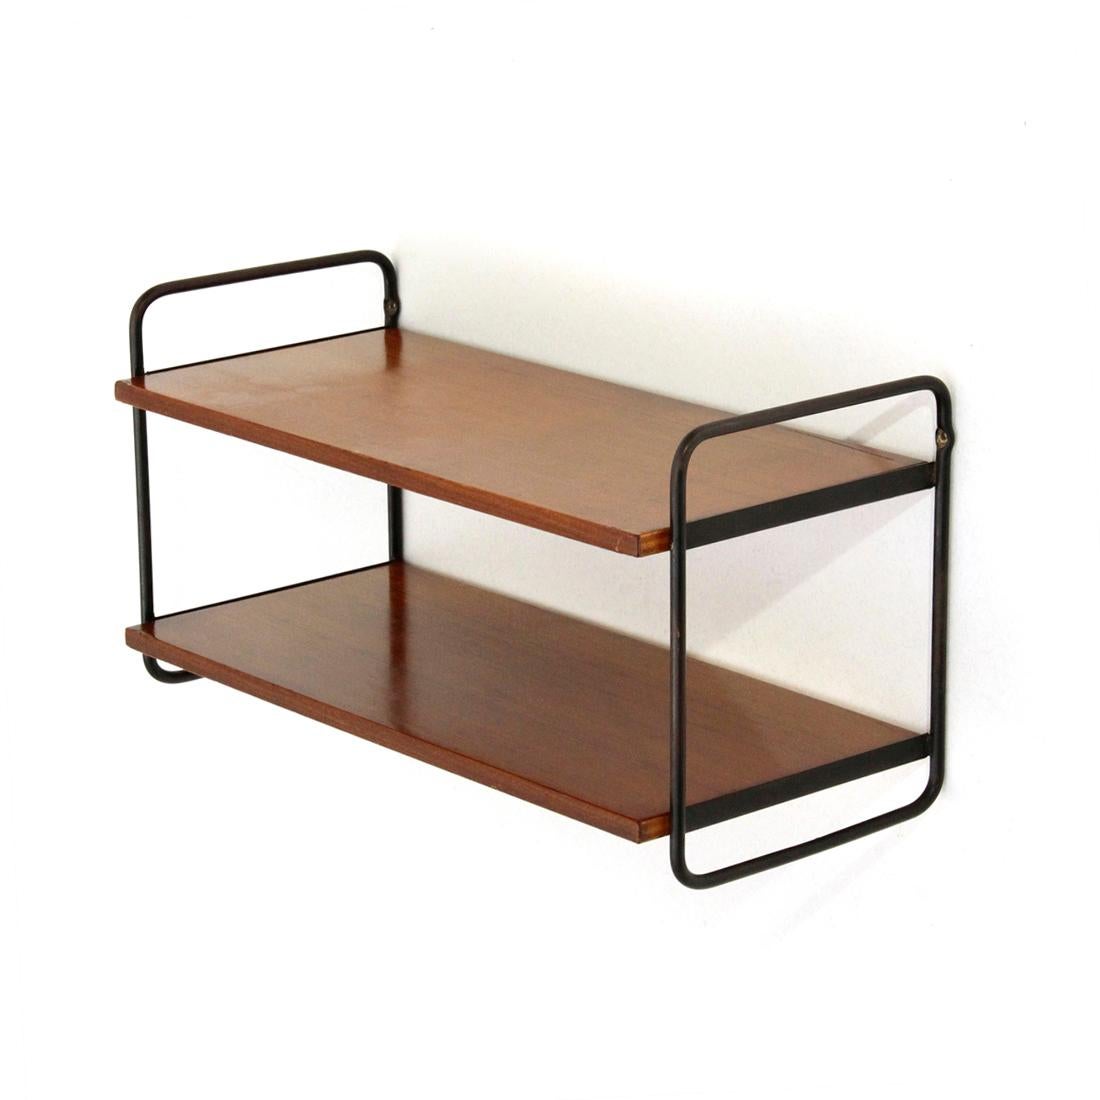 Small shelving unit of Italian craftsmanship produced in the 1960s.
Black painted metal structure.
Pair of shelves in teak veneered wood.
Good general condition, some signs due to normal use over time.

Dimensions: Length 47 cm, depth 22 cm,